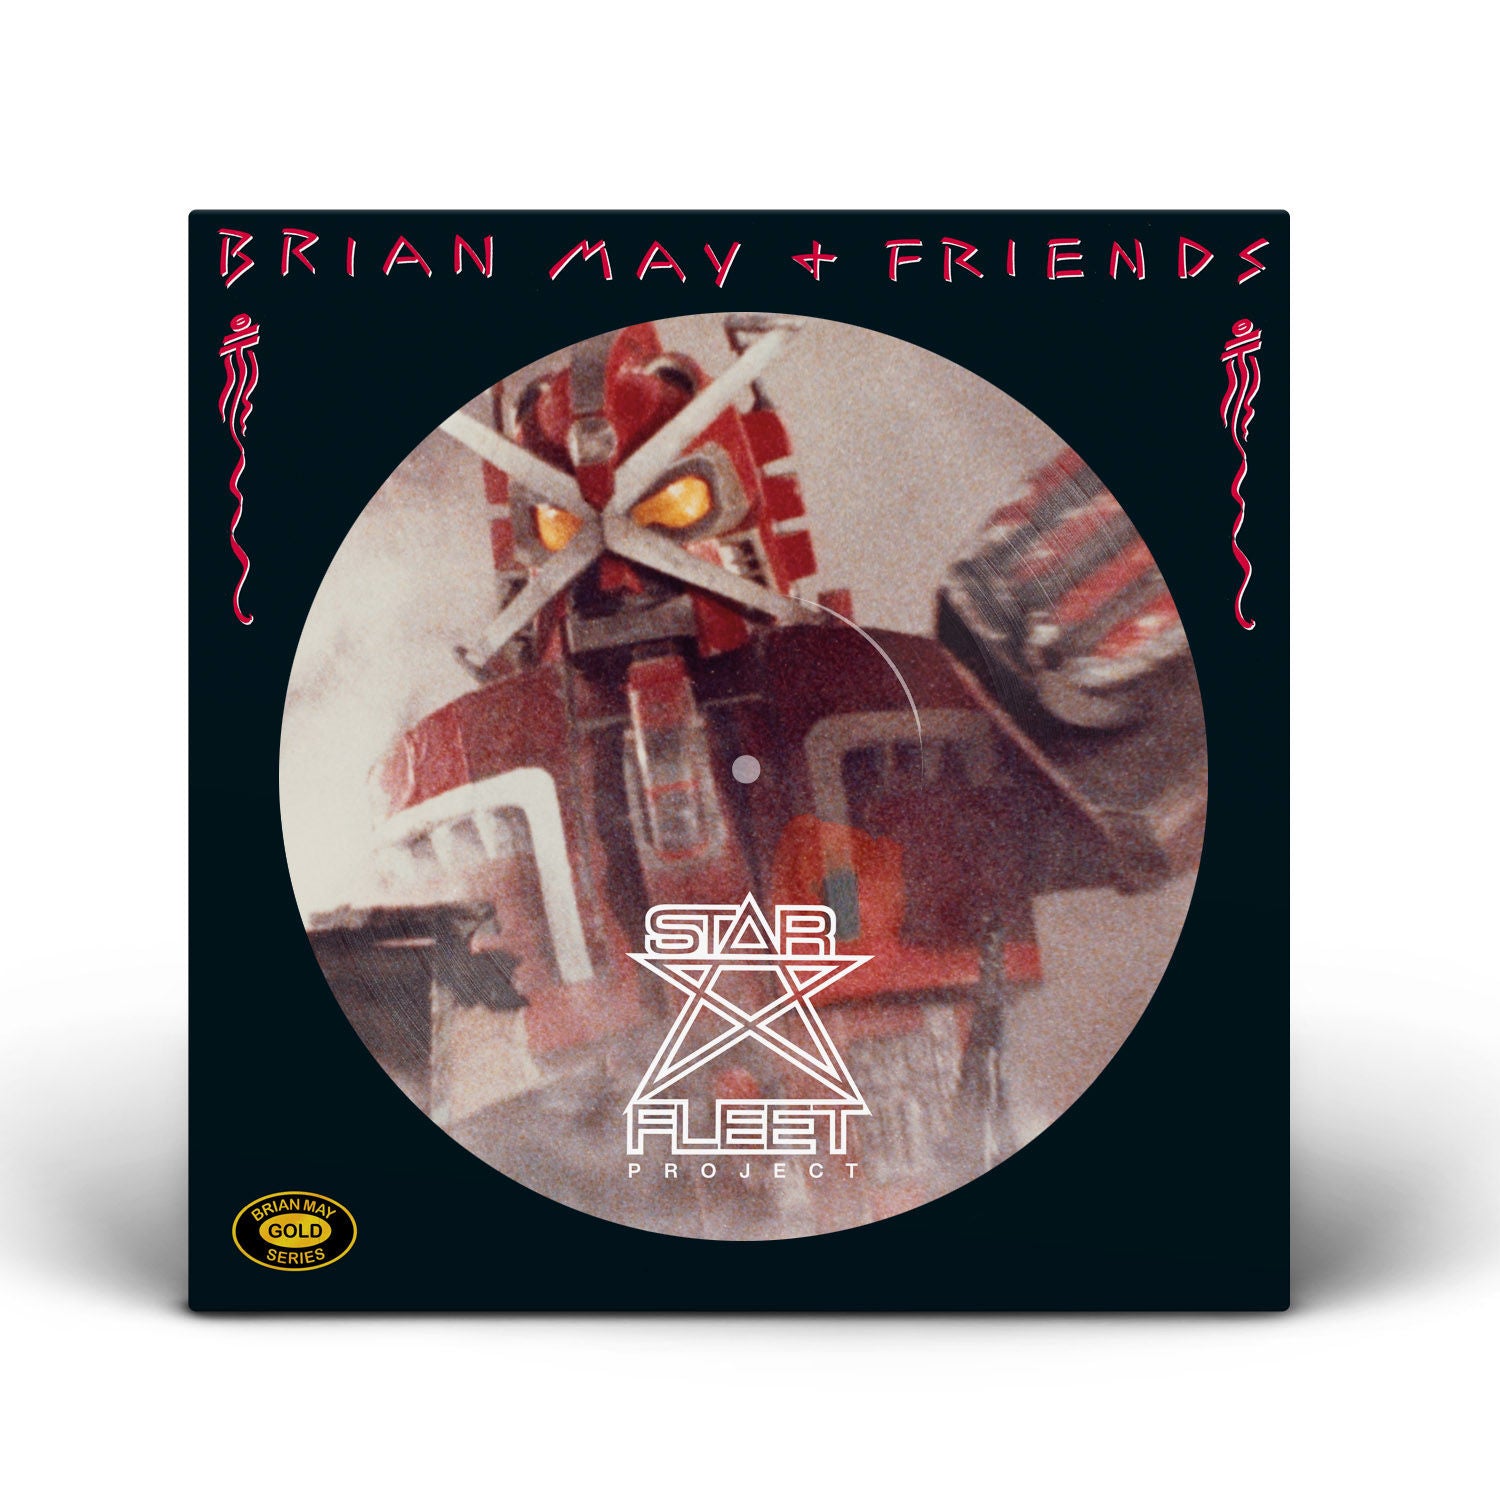 Brian May - Star Fleet Project Picture Disc